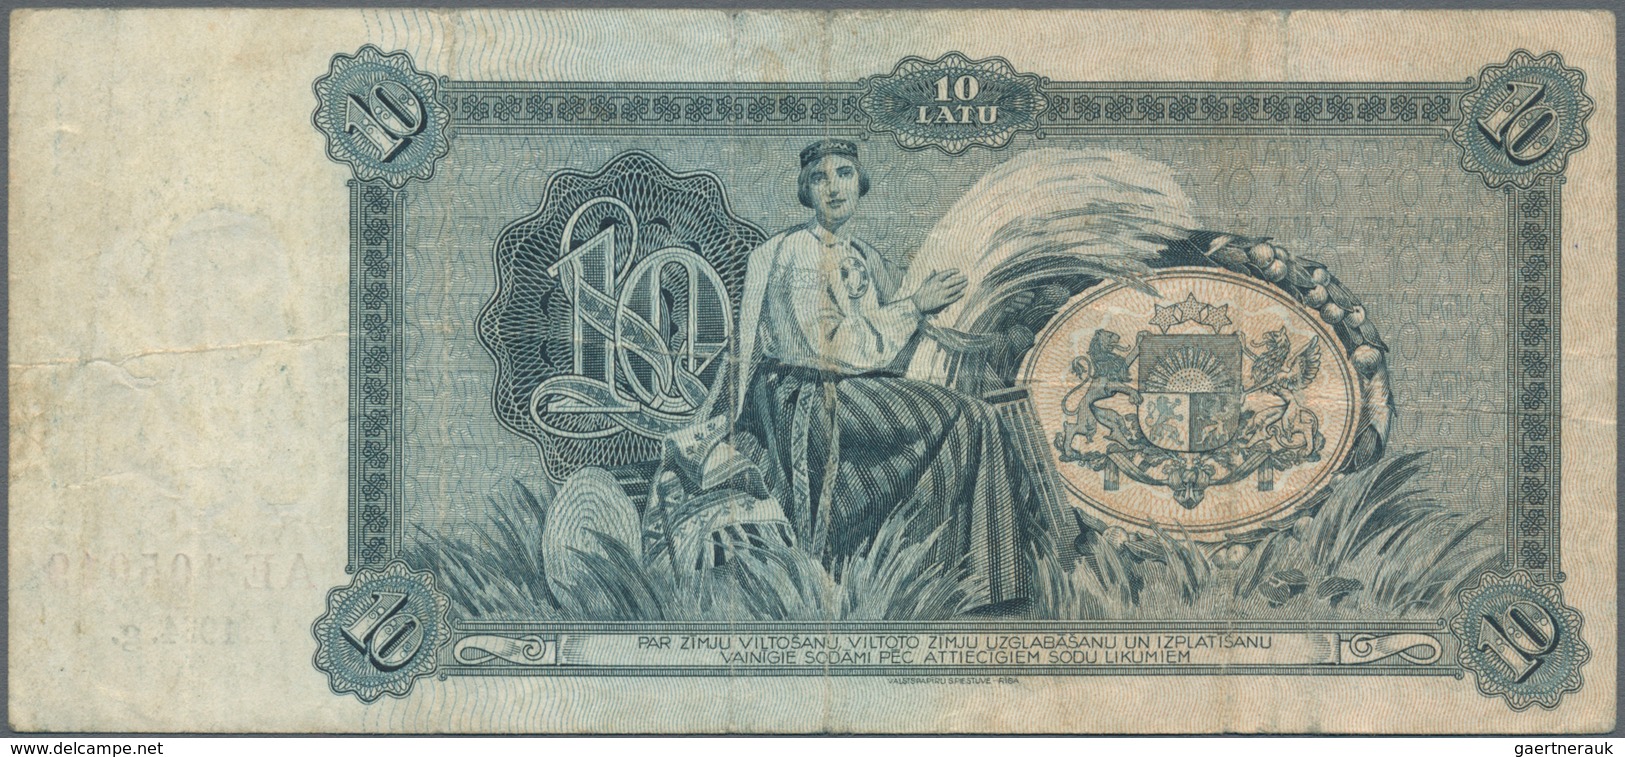 Latvia / Lettland: Set Of 2 Notes Containing 10 Latu 1933 & 1934 P. 24a, 25f, Both Used With Folds A - Lettonia